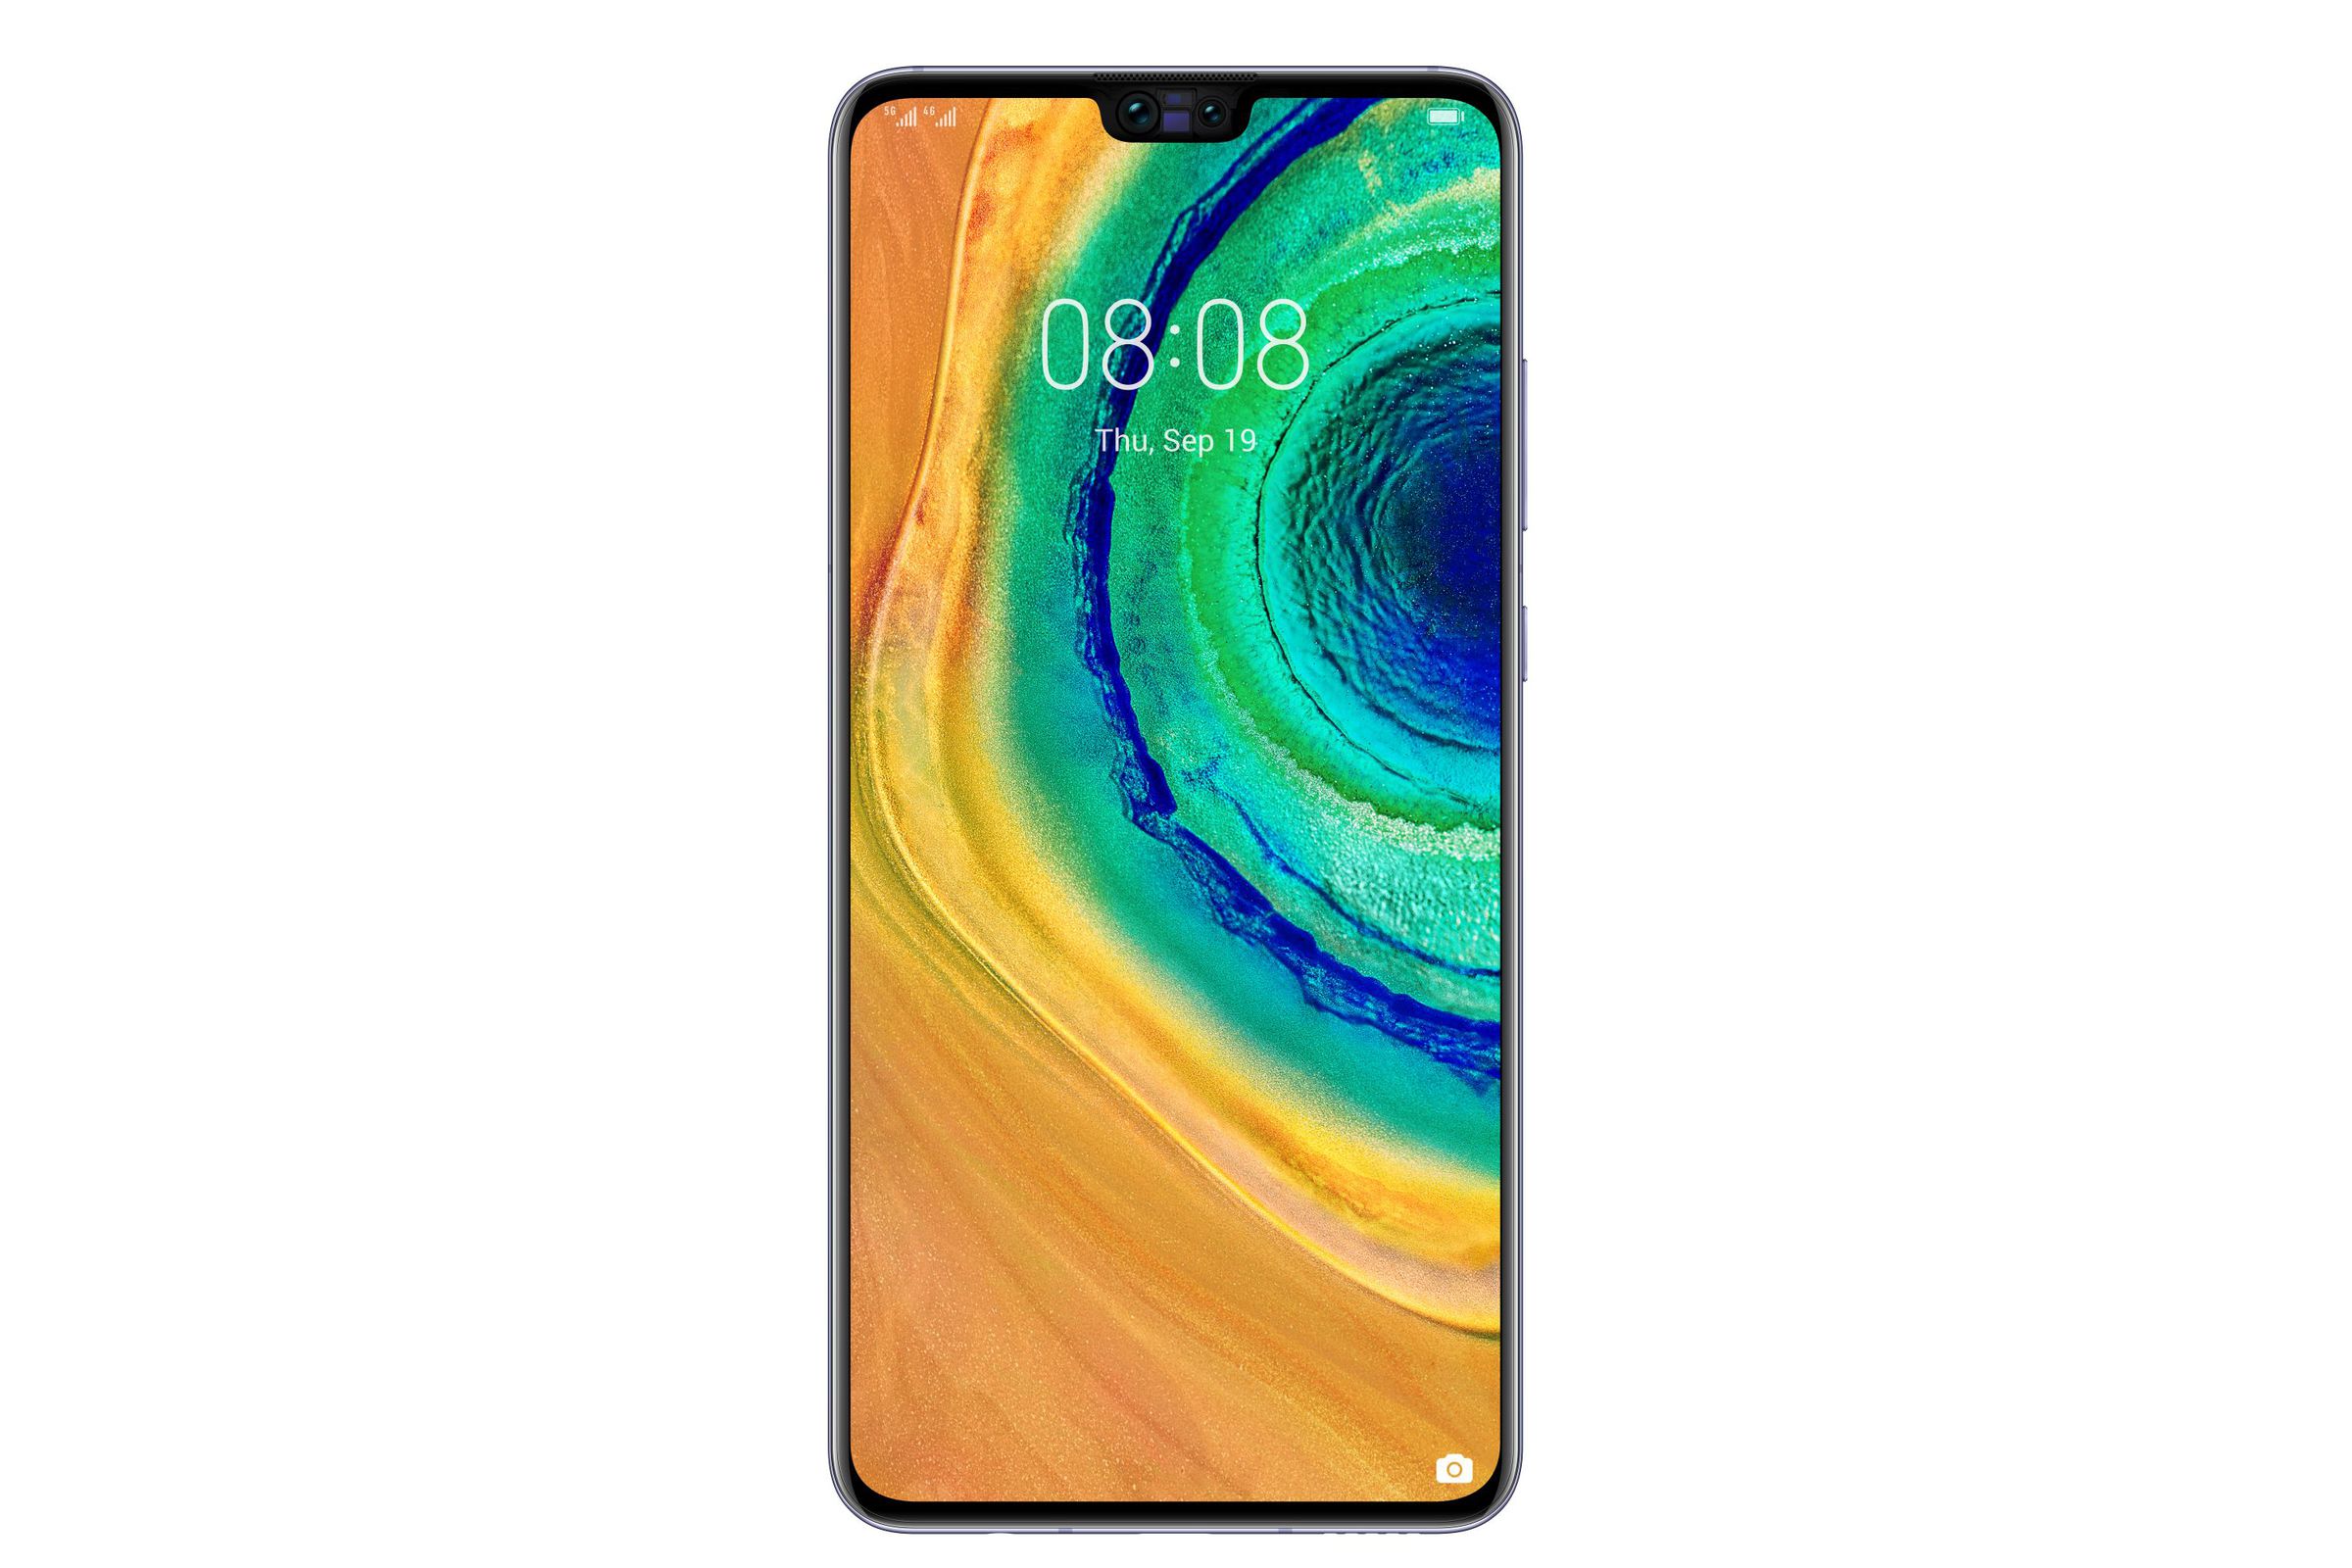 The regular Mate 30 looks to have a smaller notch and no curved display.